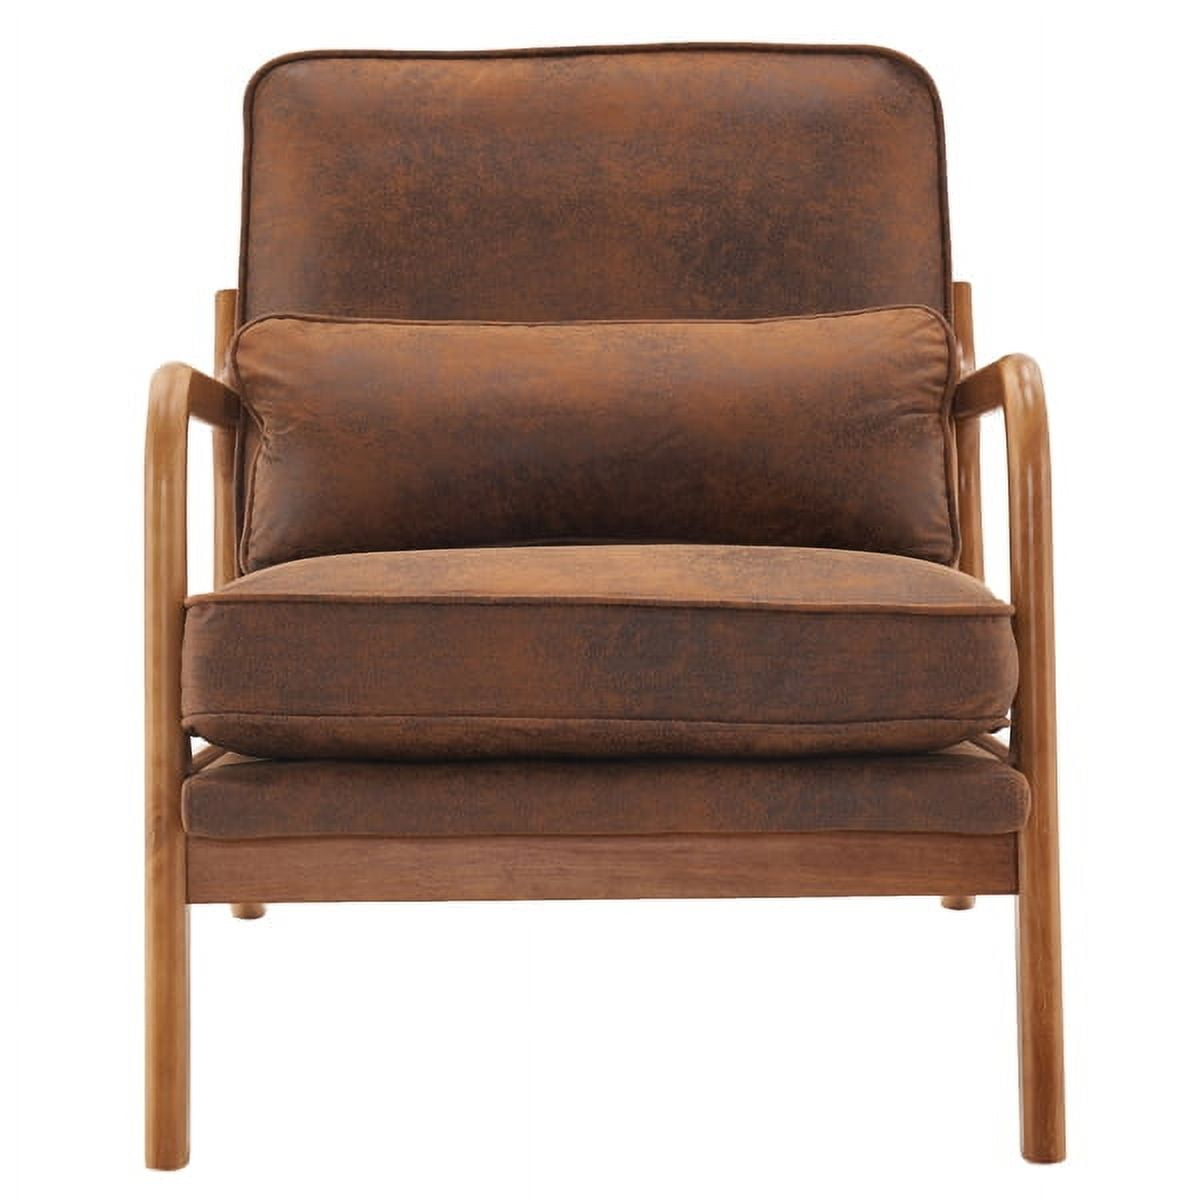  VASAGLE EKHO Collection - Accent Chair, Metal Framed Armchair,  Synthetic Leather with Stitching, Mid-Century Modern, Sling Chair for  Living, Bedroom, Reading Room, Lounge, Caramel Brown ULAC014K01 :  Everything Else